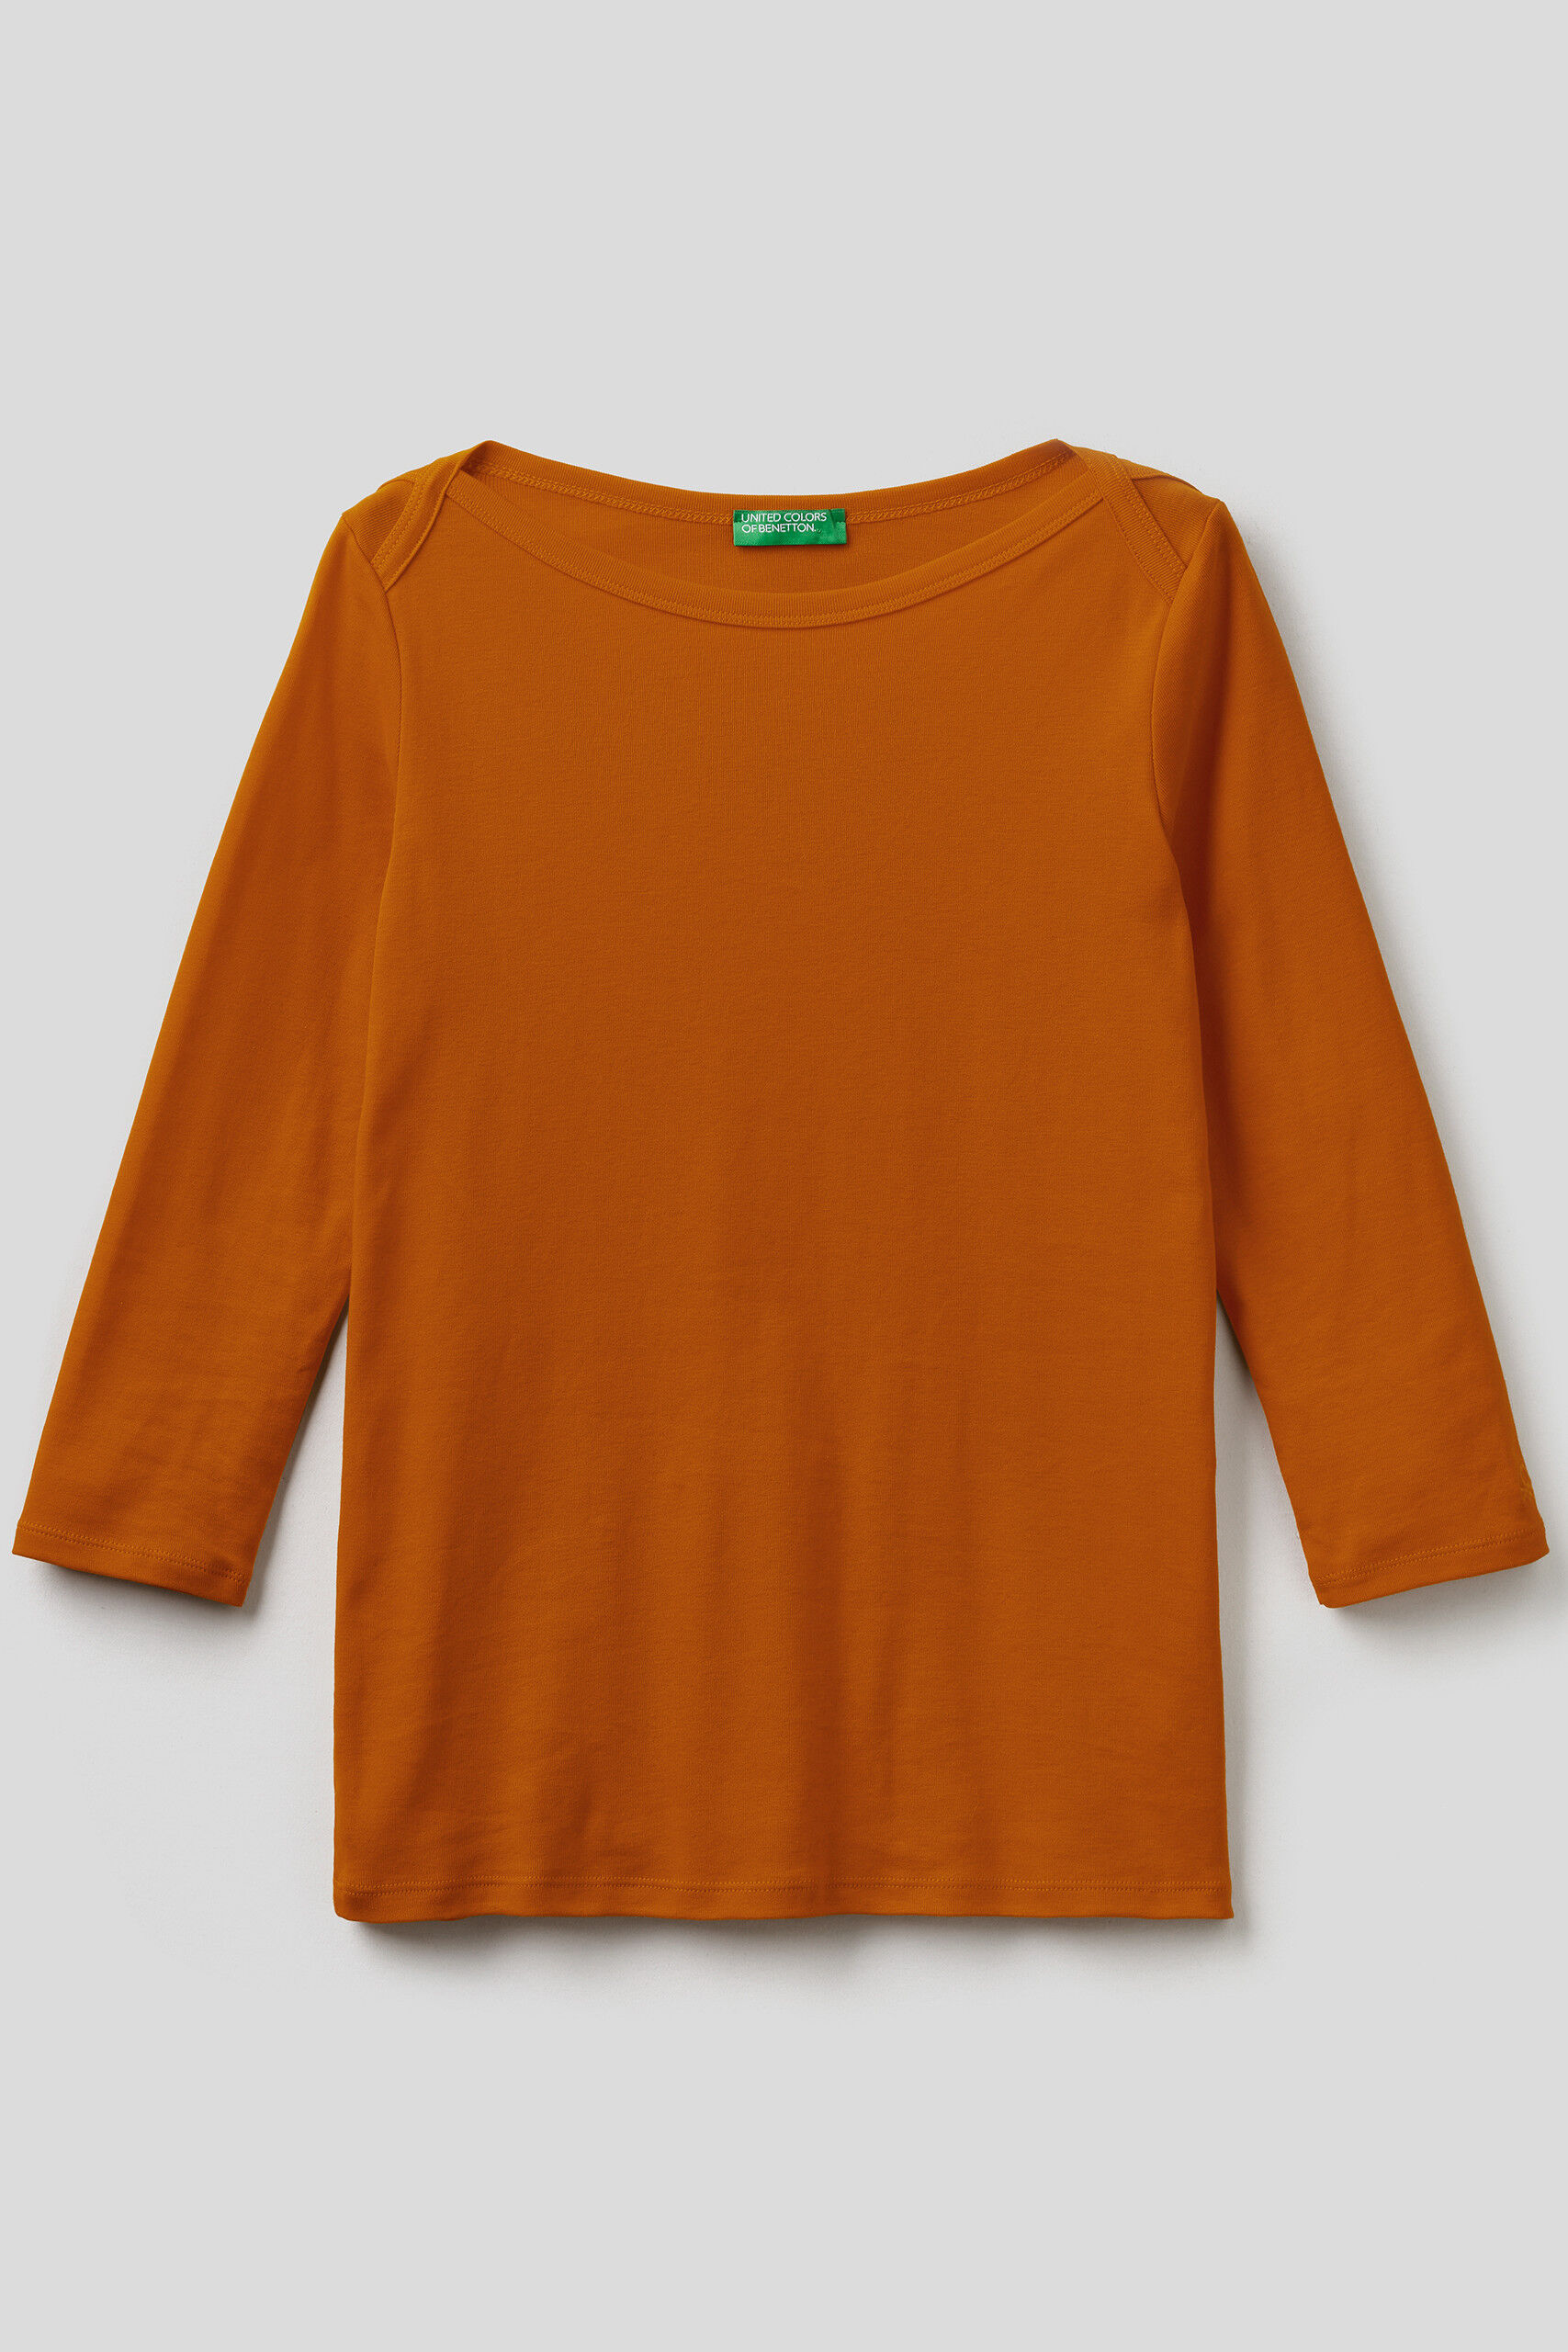 New Collection Women's Apparel | Benetton